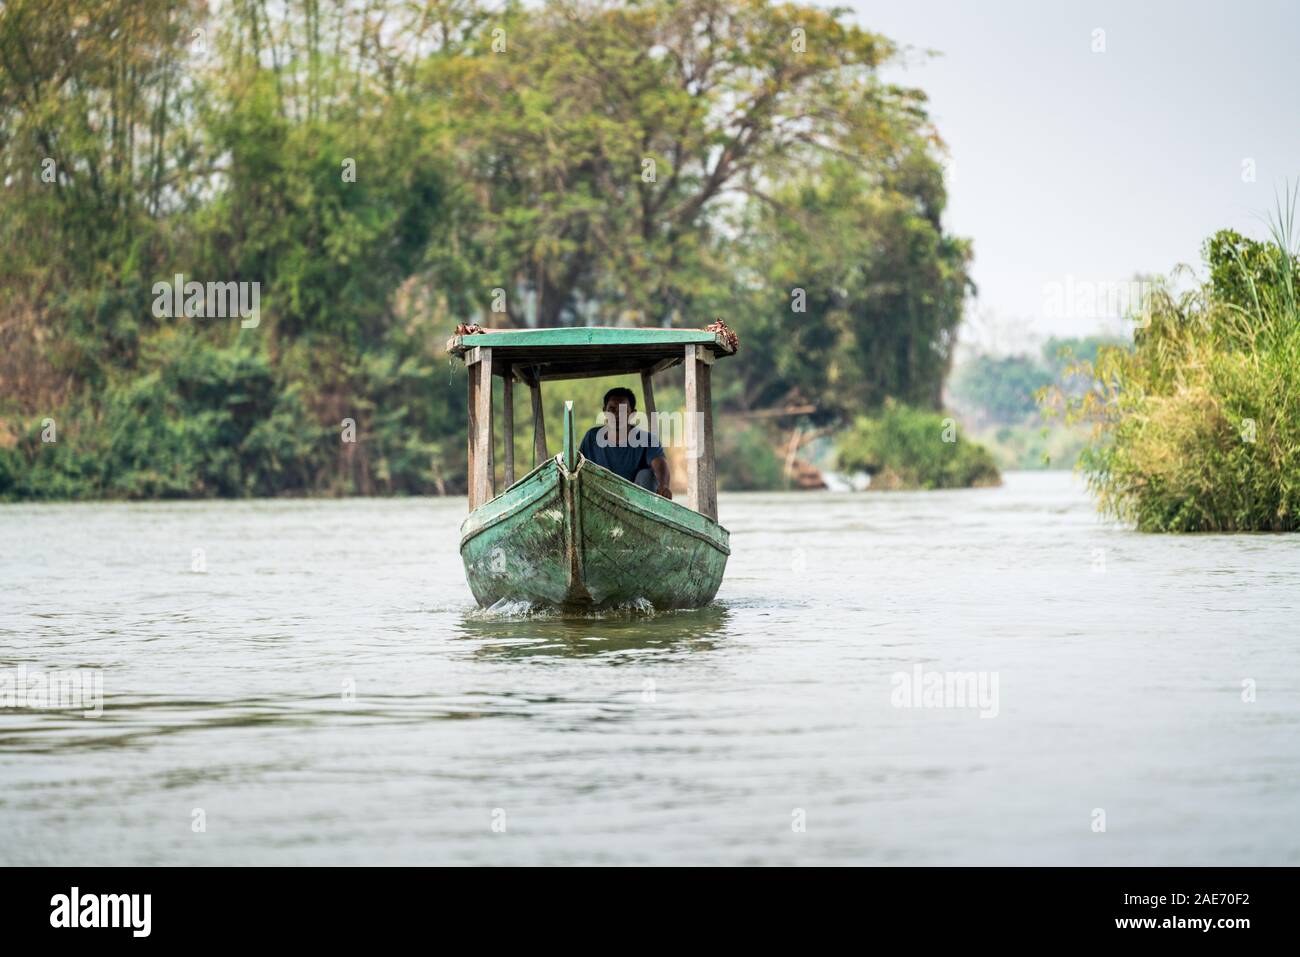 Transport by boat on the Mekong river, Don Det Island, Laos, Asia Stock Photo